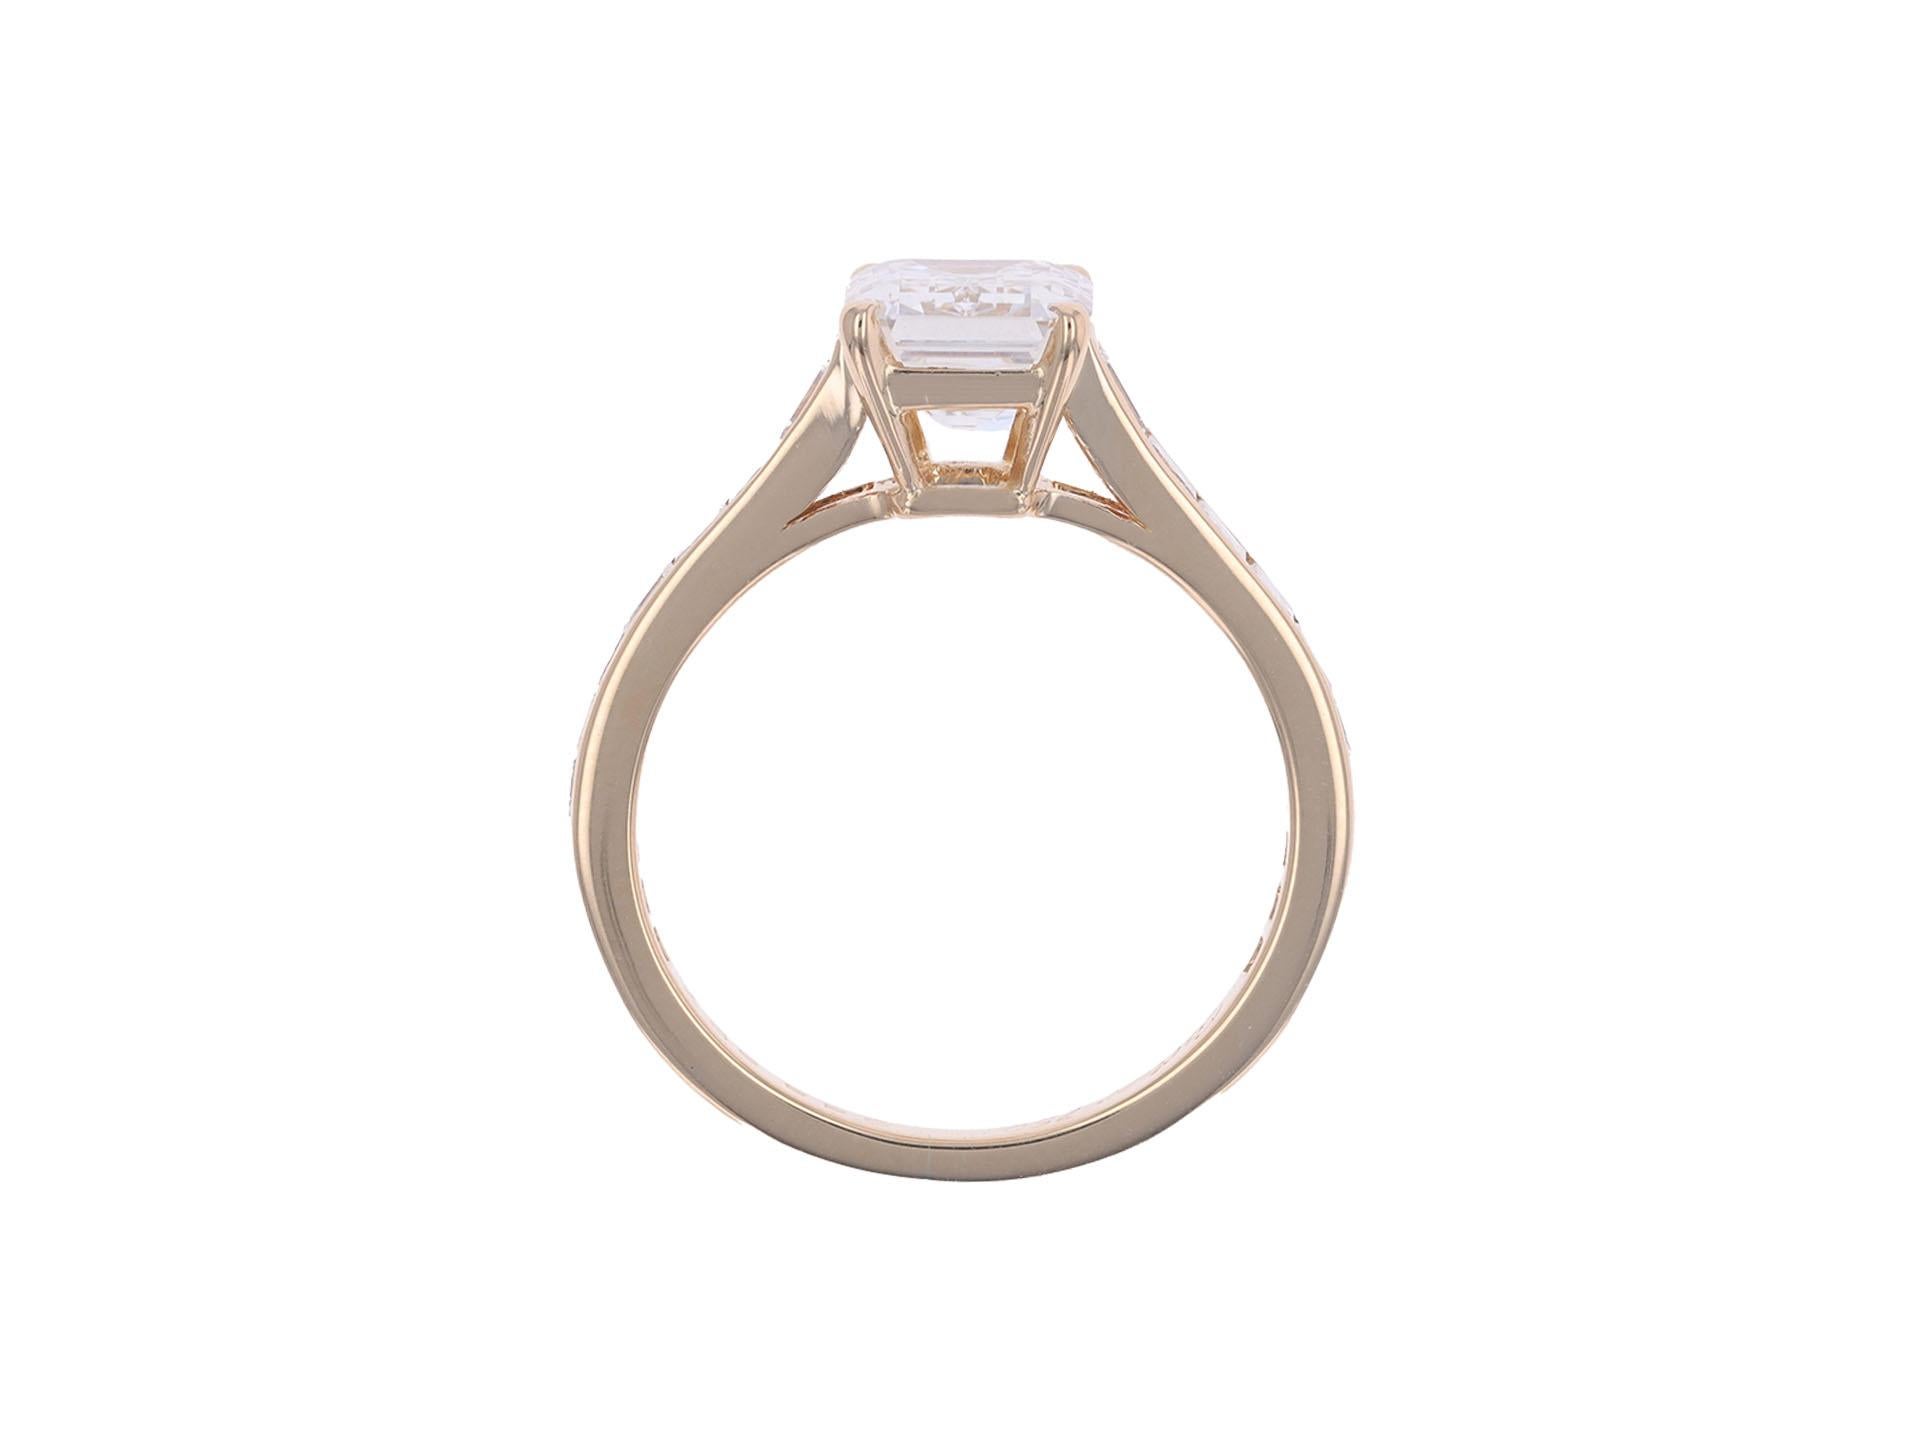 Cartier diamond flanked solitaire ring. Set to centre with an octagonal emerald cut diamond, H colour, VVS2 clarity, with a weight of 2.13 carats, in an open back claw setting, flanked by twenty square step cut diamonds in open back rubover and